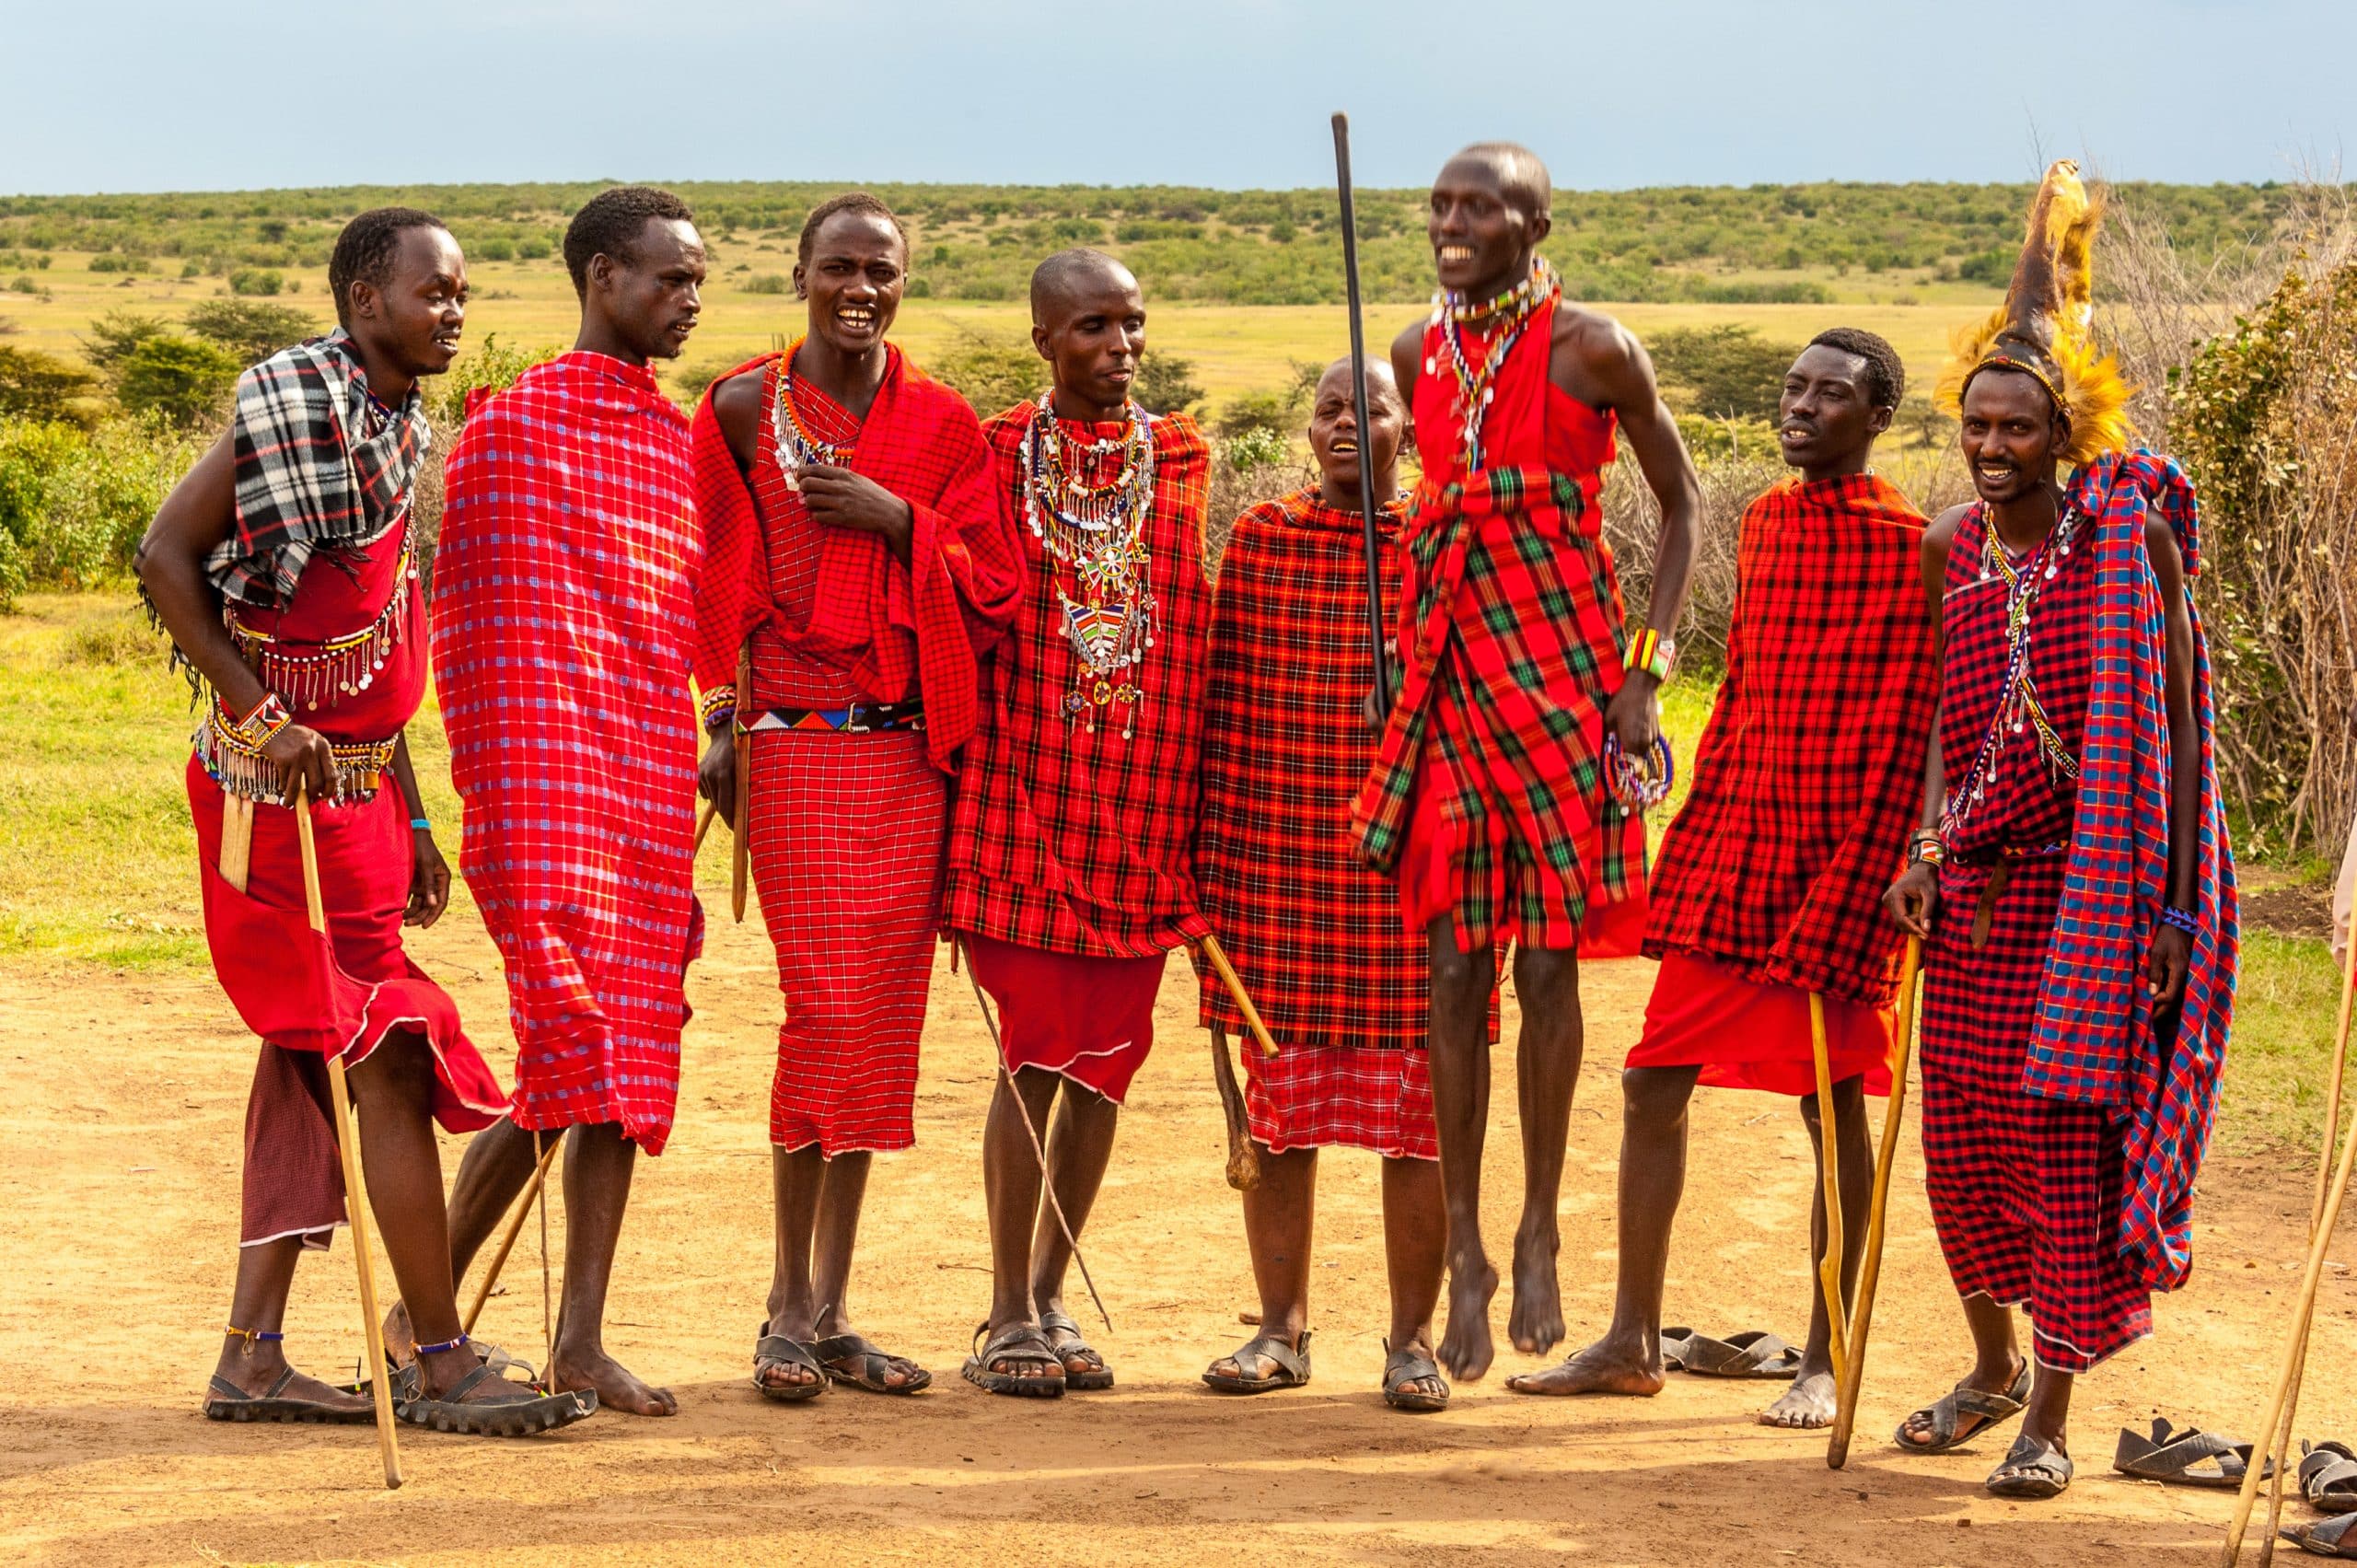 Fascinated by Maasai people